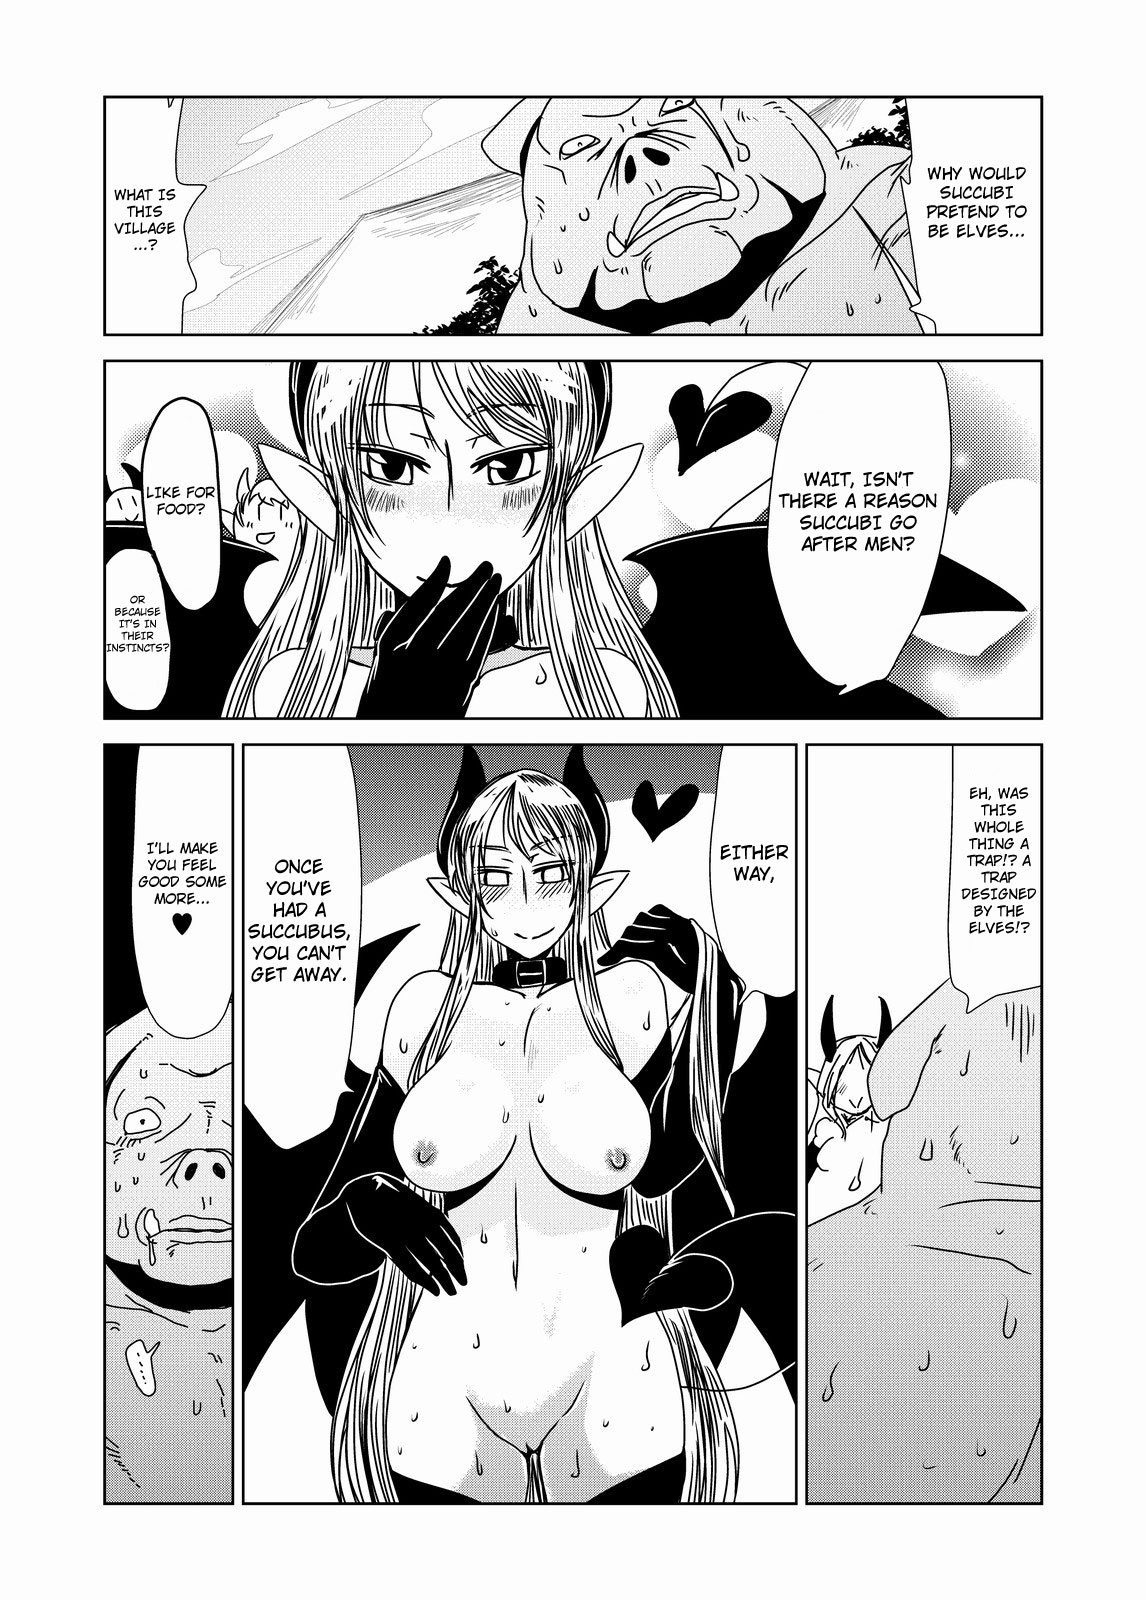 [Hroz] Orc Dakara Elf Osotta Zenin Succubus Datta wa. | We Assaulted Some Elves Because We're Orcs But It Turns Out They Were All Actually Succubi [English] [4dawgz + Thetsuuyaku] [ふろず] オークだからエルフ襲ったら全員サキュバスだったわ。 [英訳]